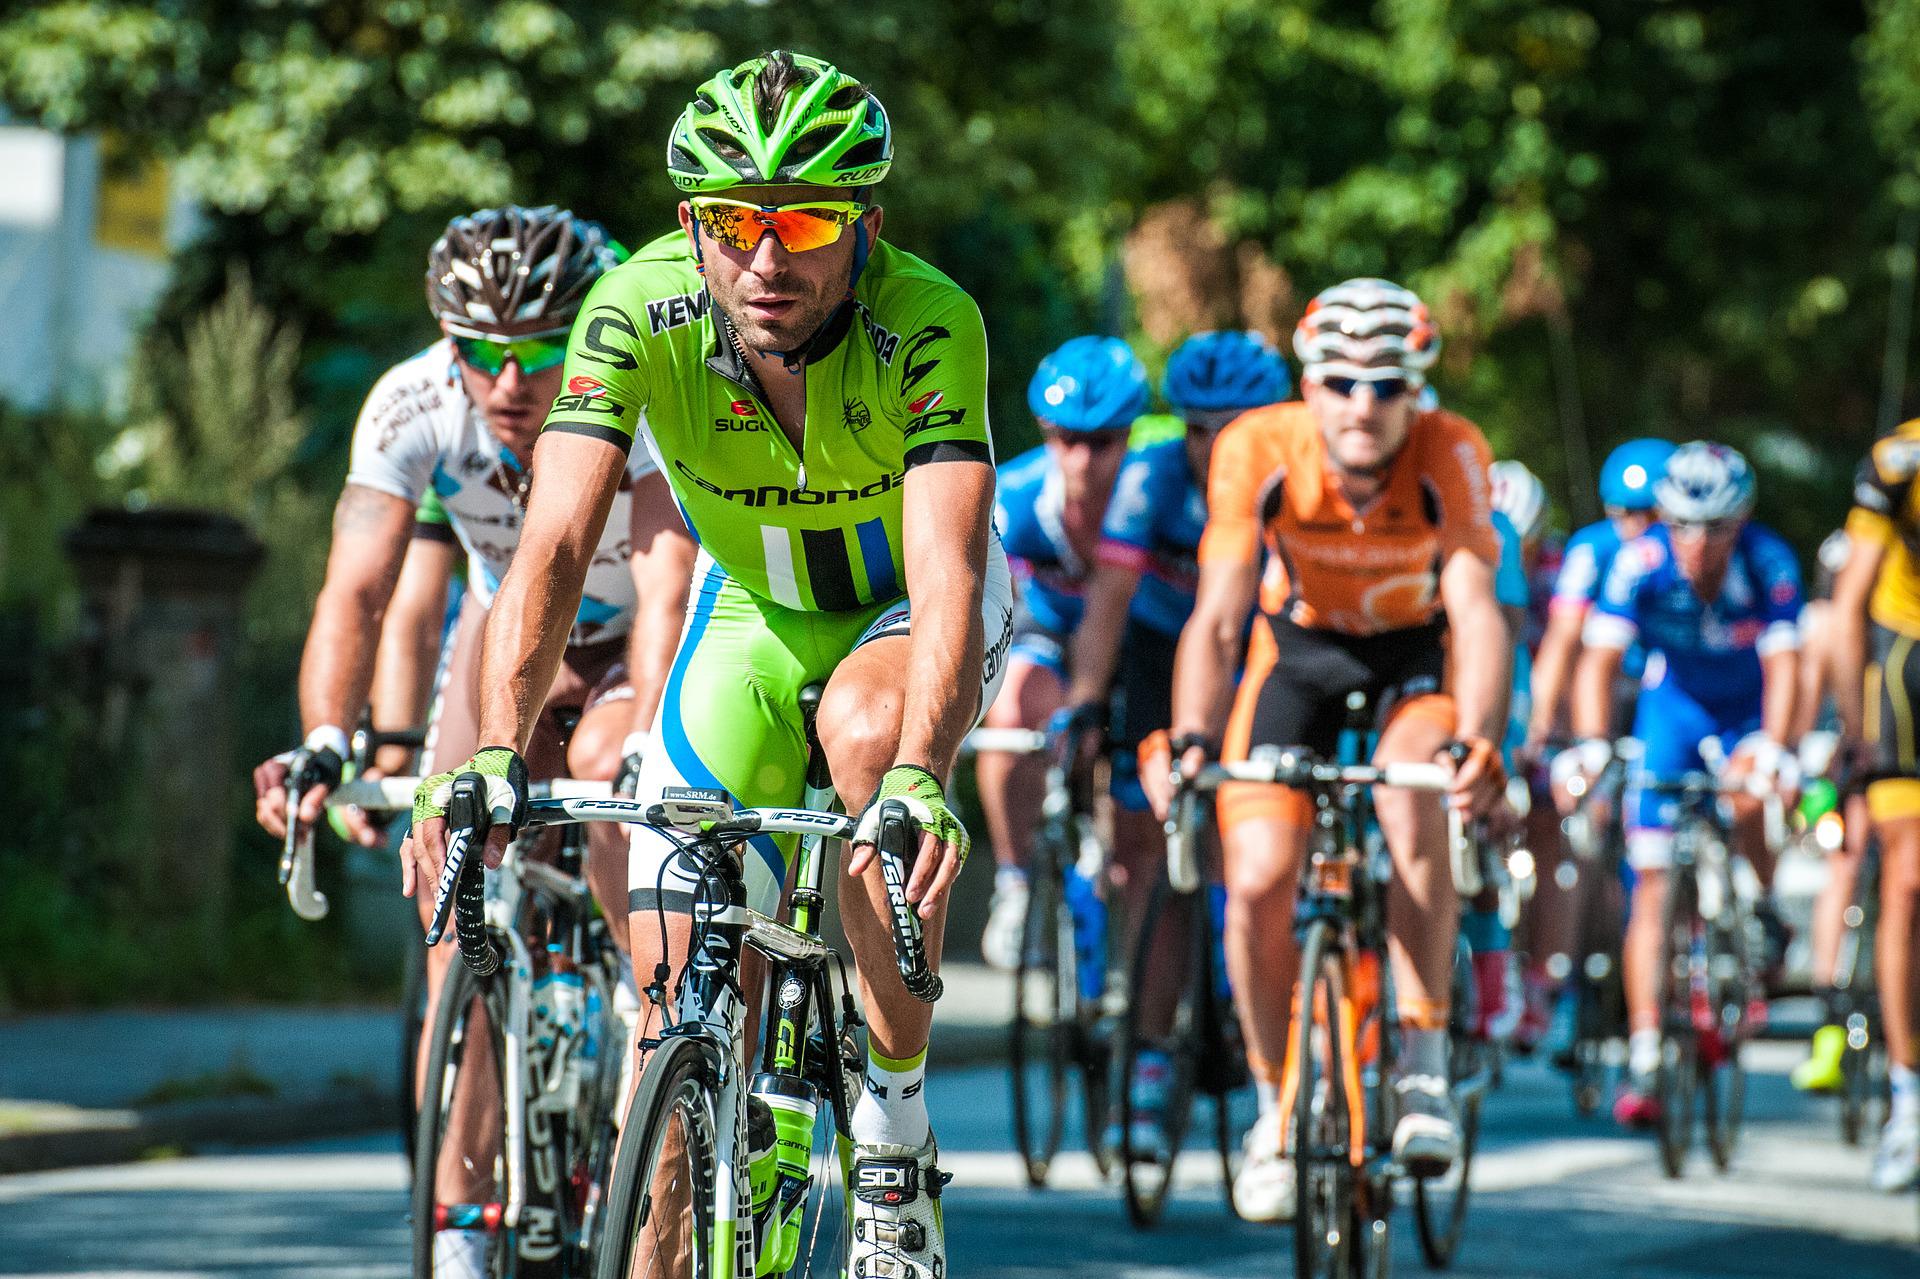 Men riding bikes in a cycle race